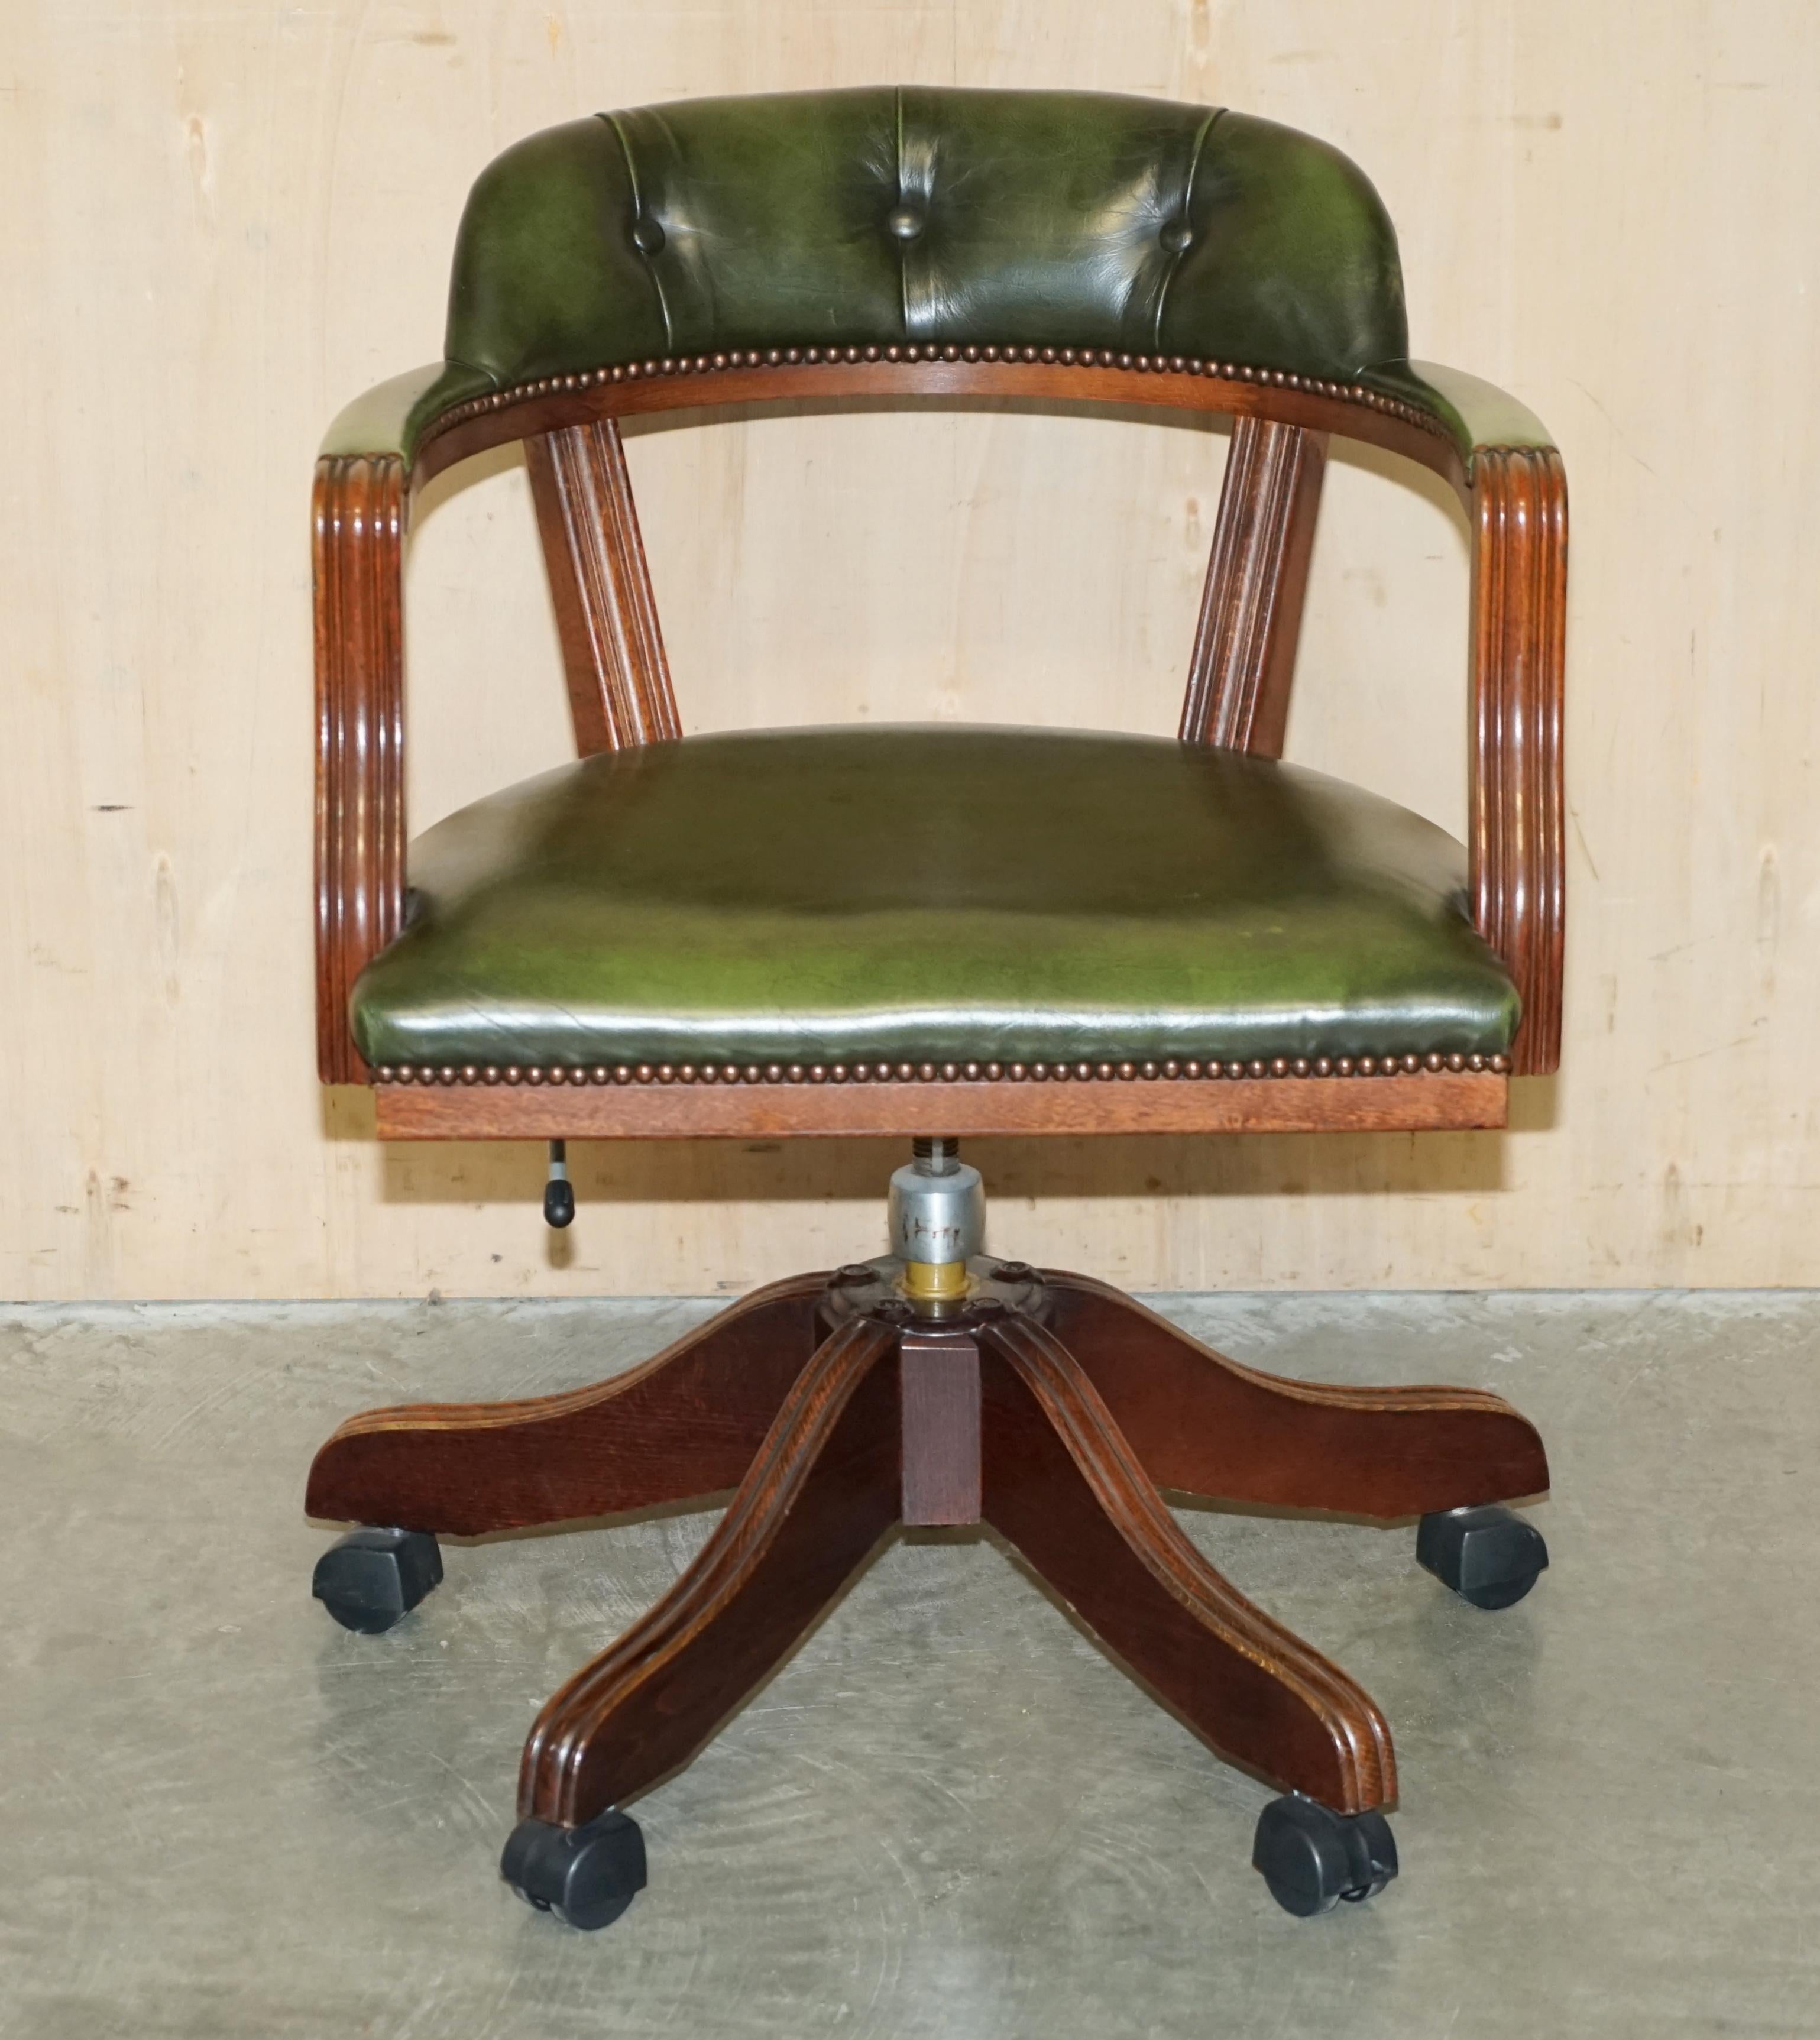 Royal House Antiques

Royal House Antiques is delighted to offer for sale this lovely vintage Green Leather made in England Chesterfield Court chair

Please note the delivery fee listed is just a guide, it covers within the M25 only for the UK and